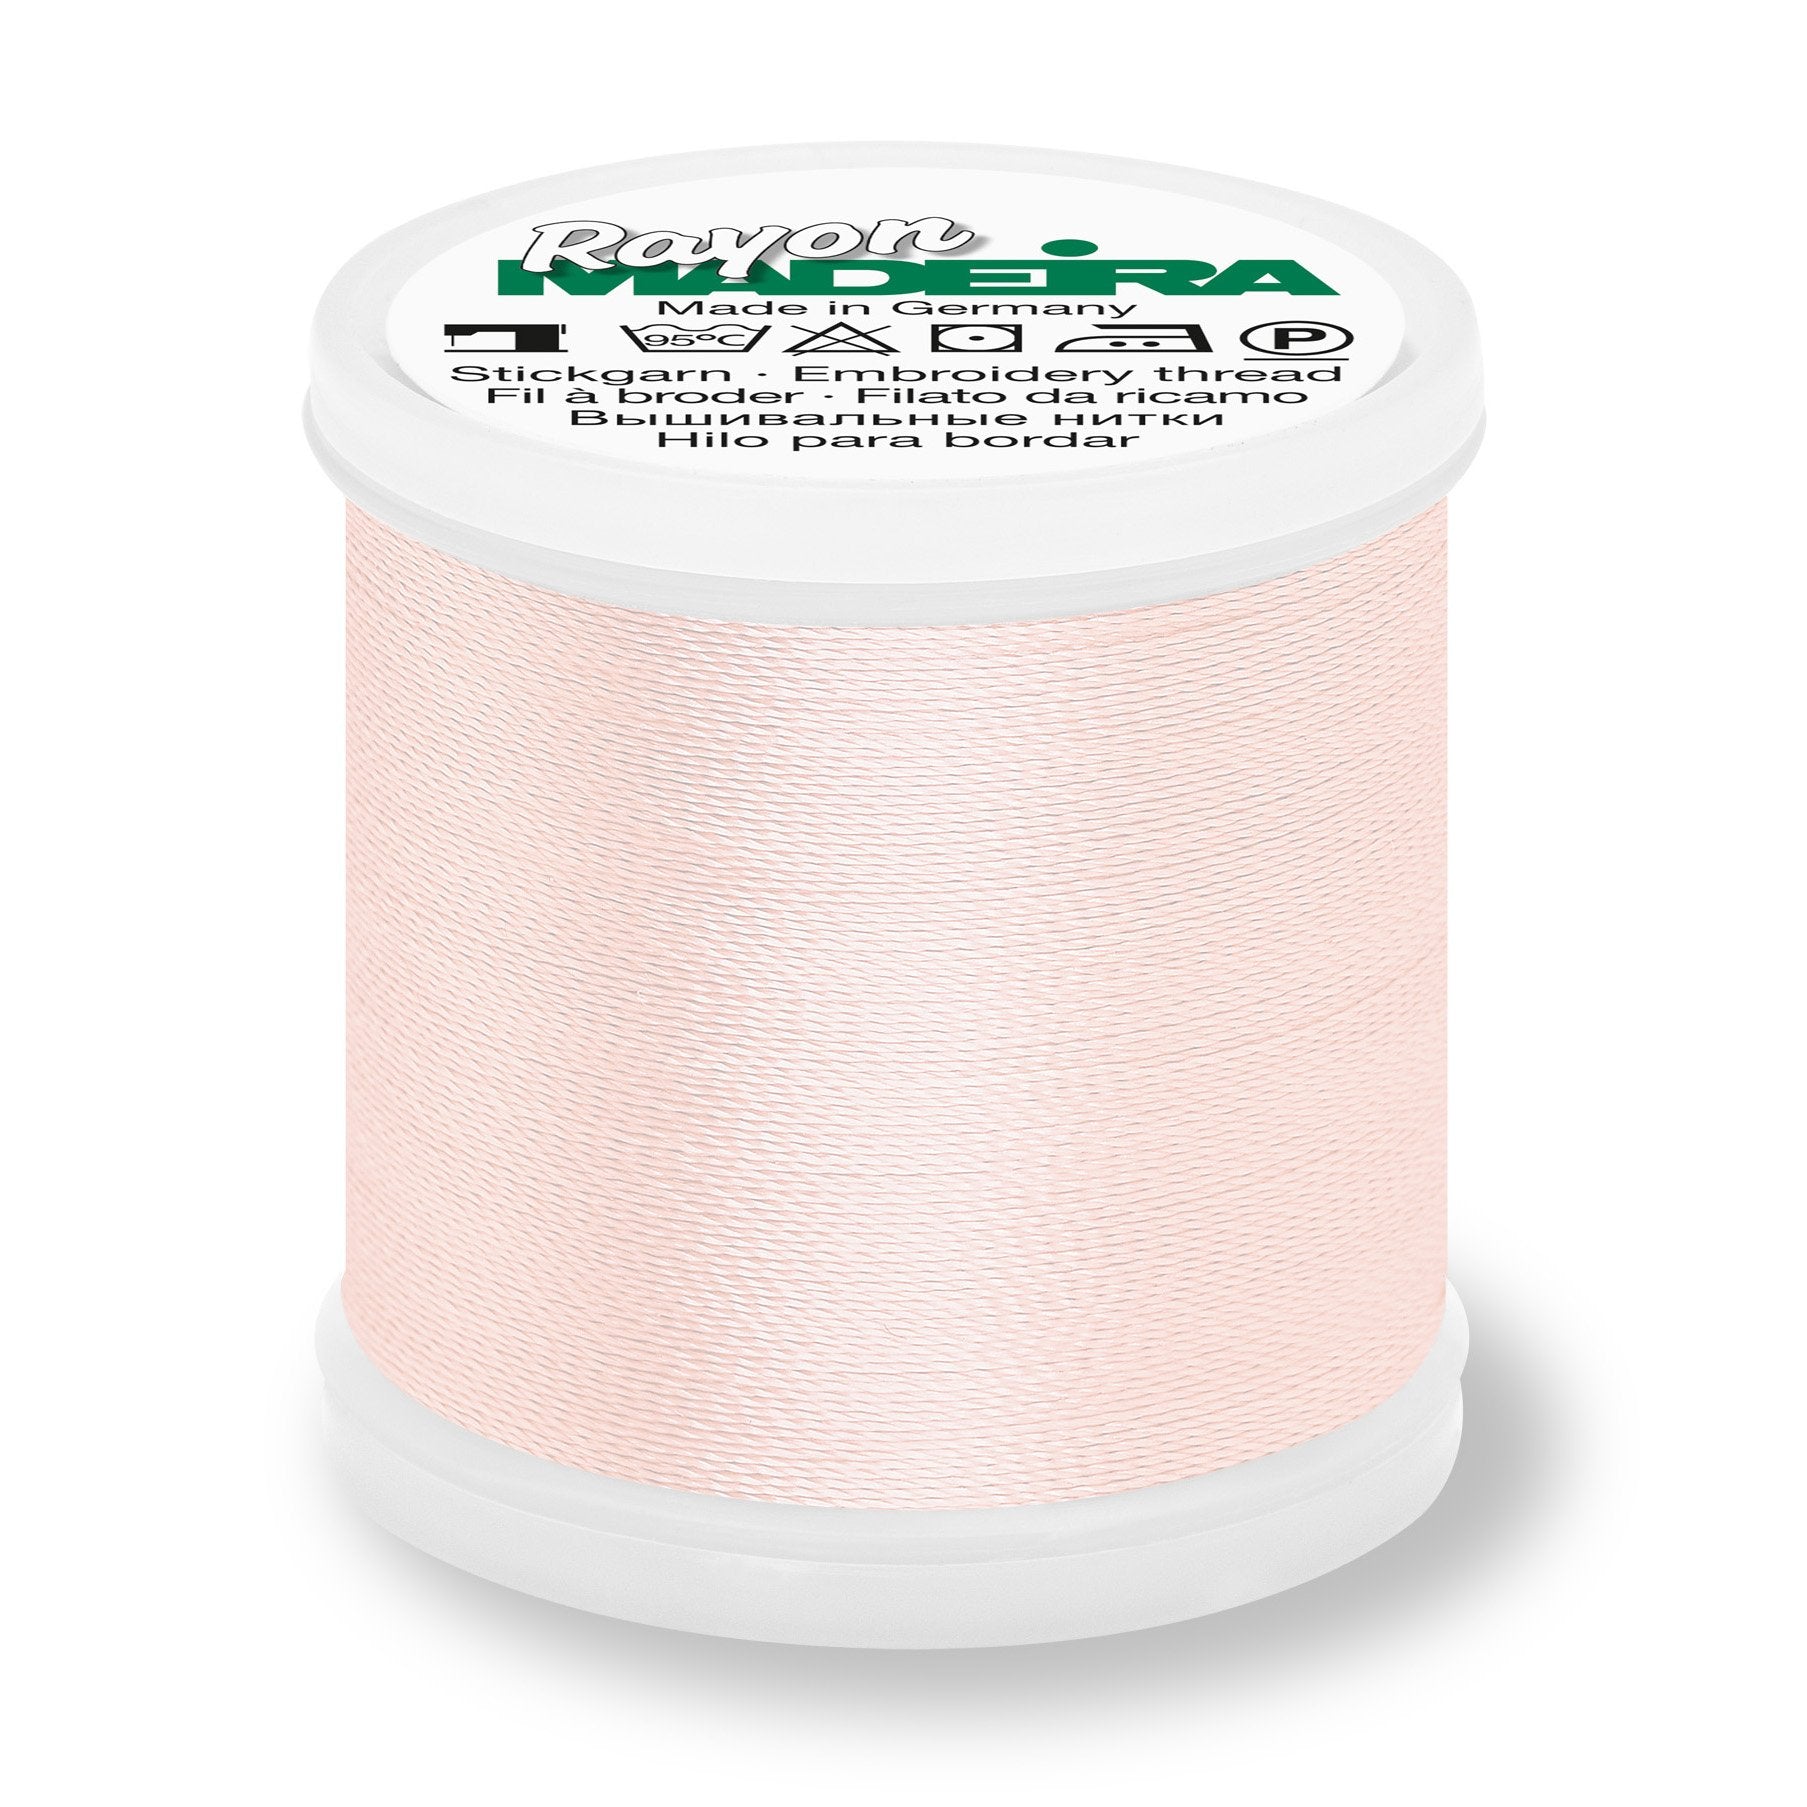 Madeira Rayon 40 Embroidery Thread 200m #1013 Pale Pink from Jaycotts Sewing Supplies